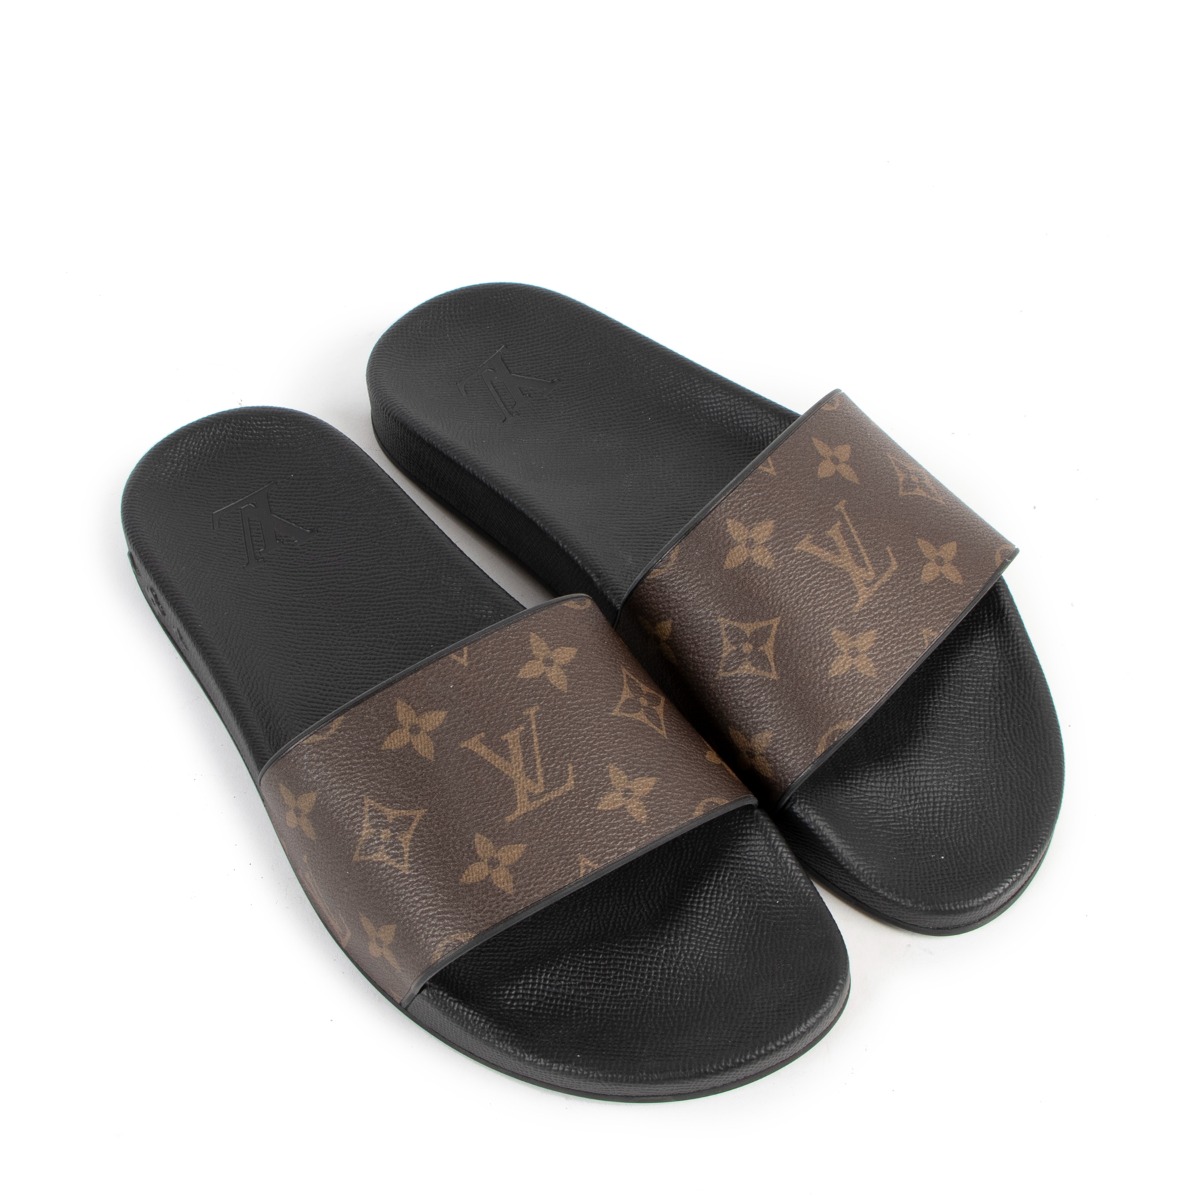 Louis Vuitton Waterfront Mule Monogram Slippers In Black And White - Praise  To Heaven